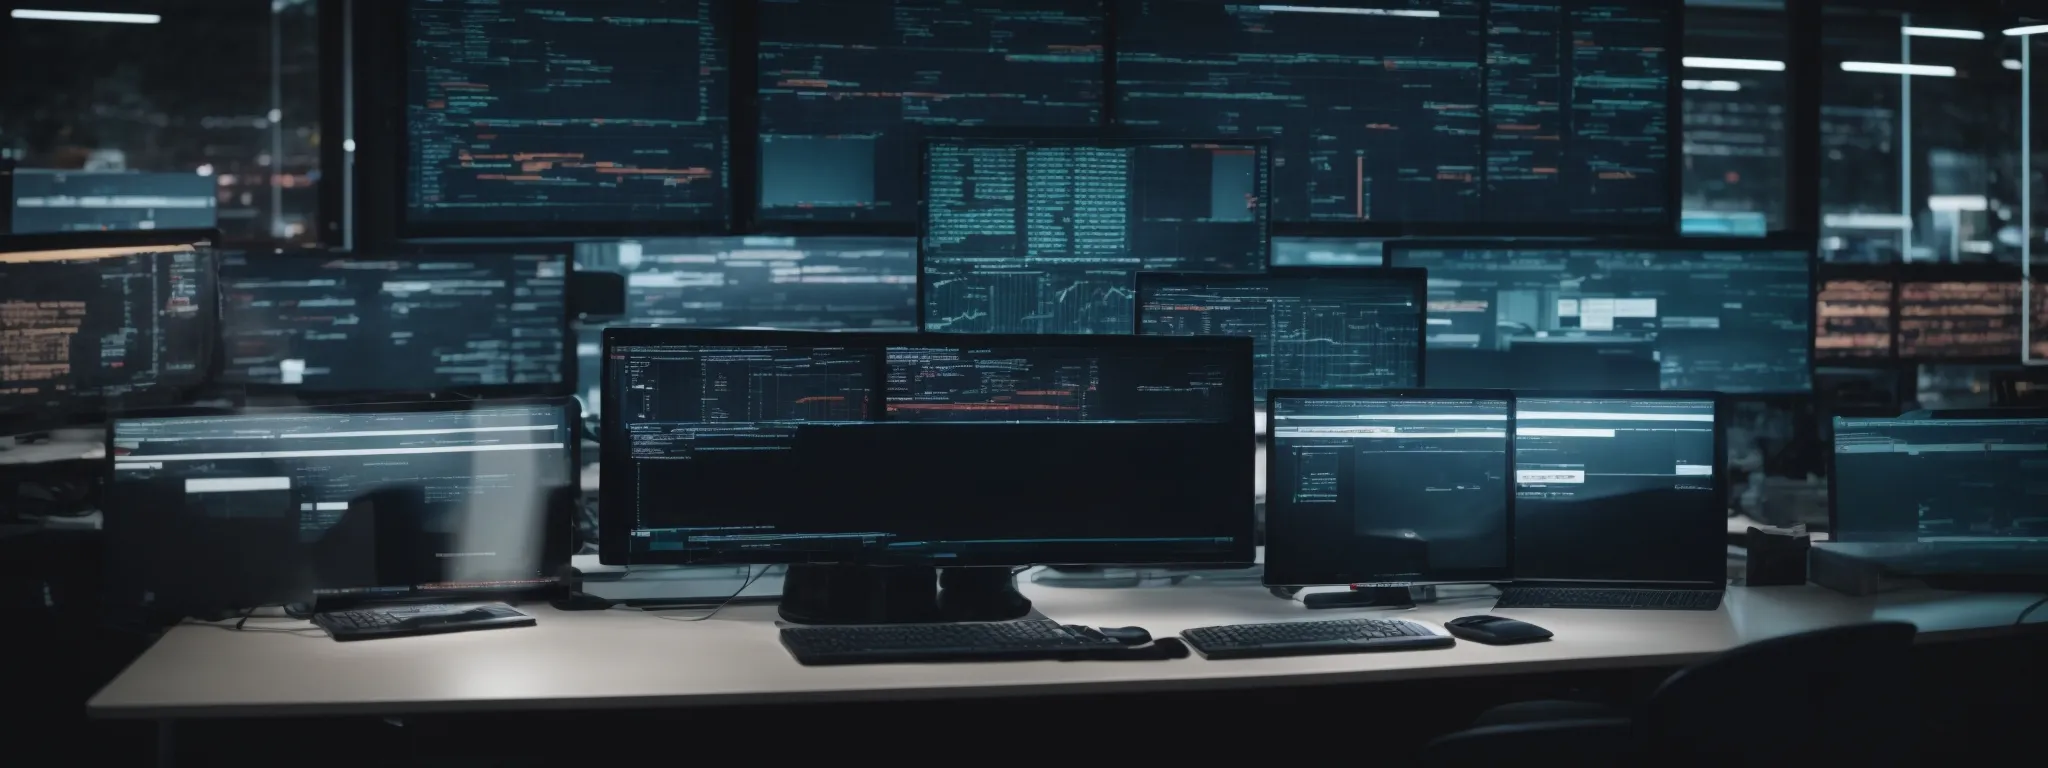 a futuristic workspace with multiple screens displaying data analytics and code.